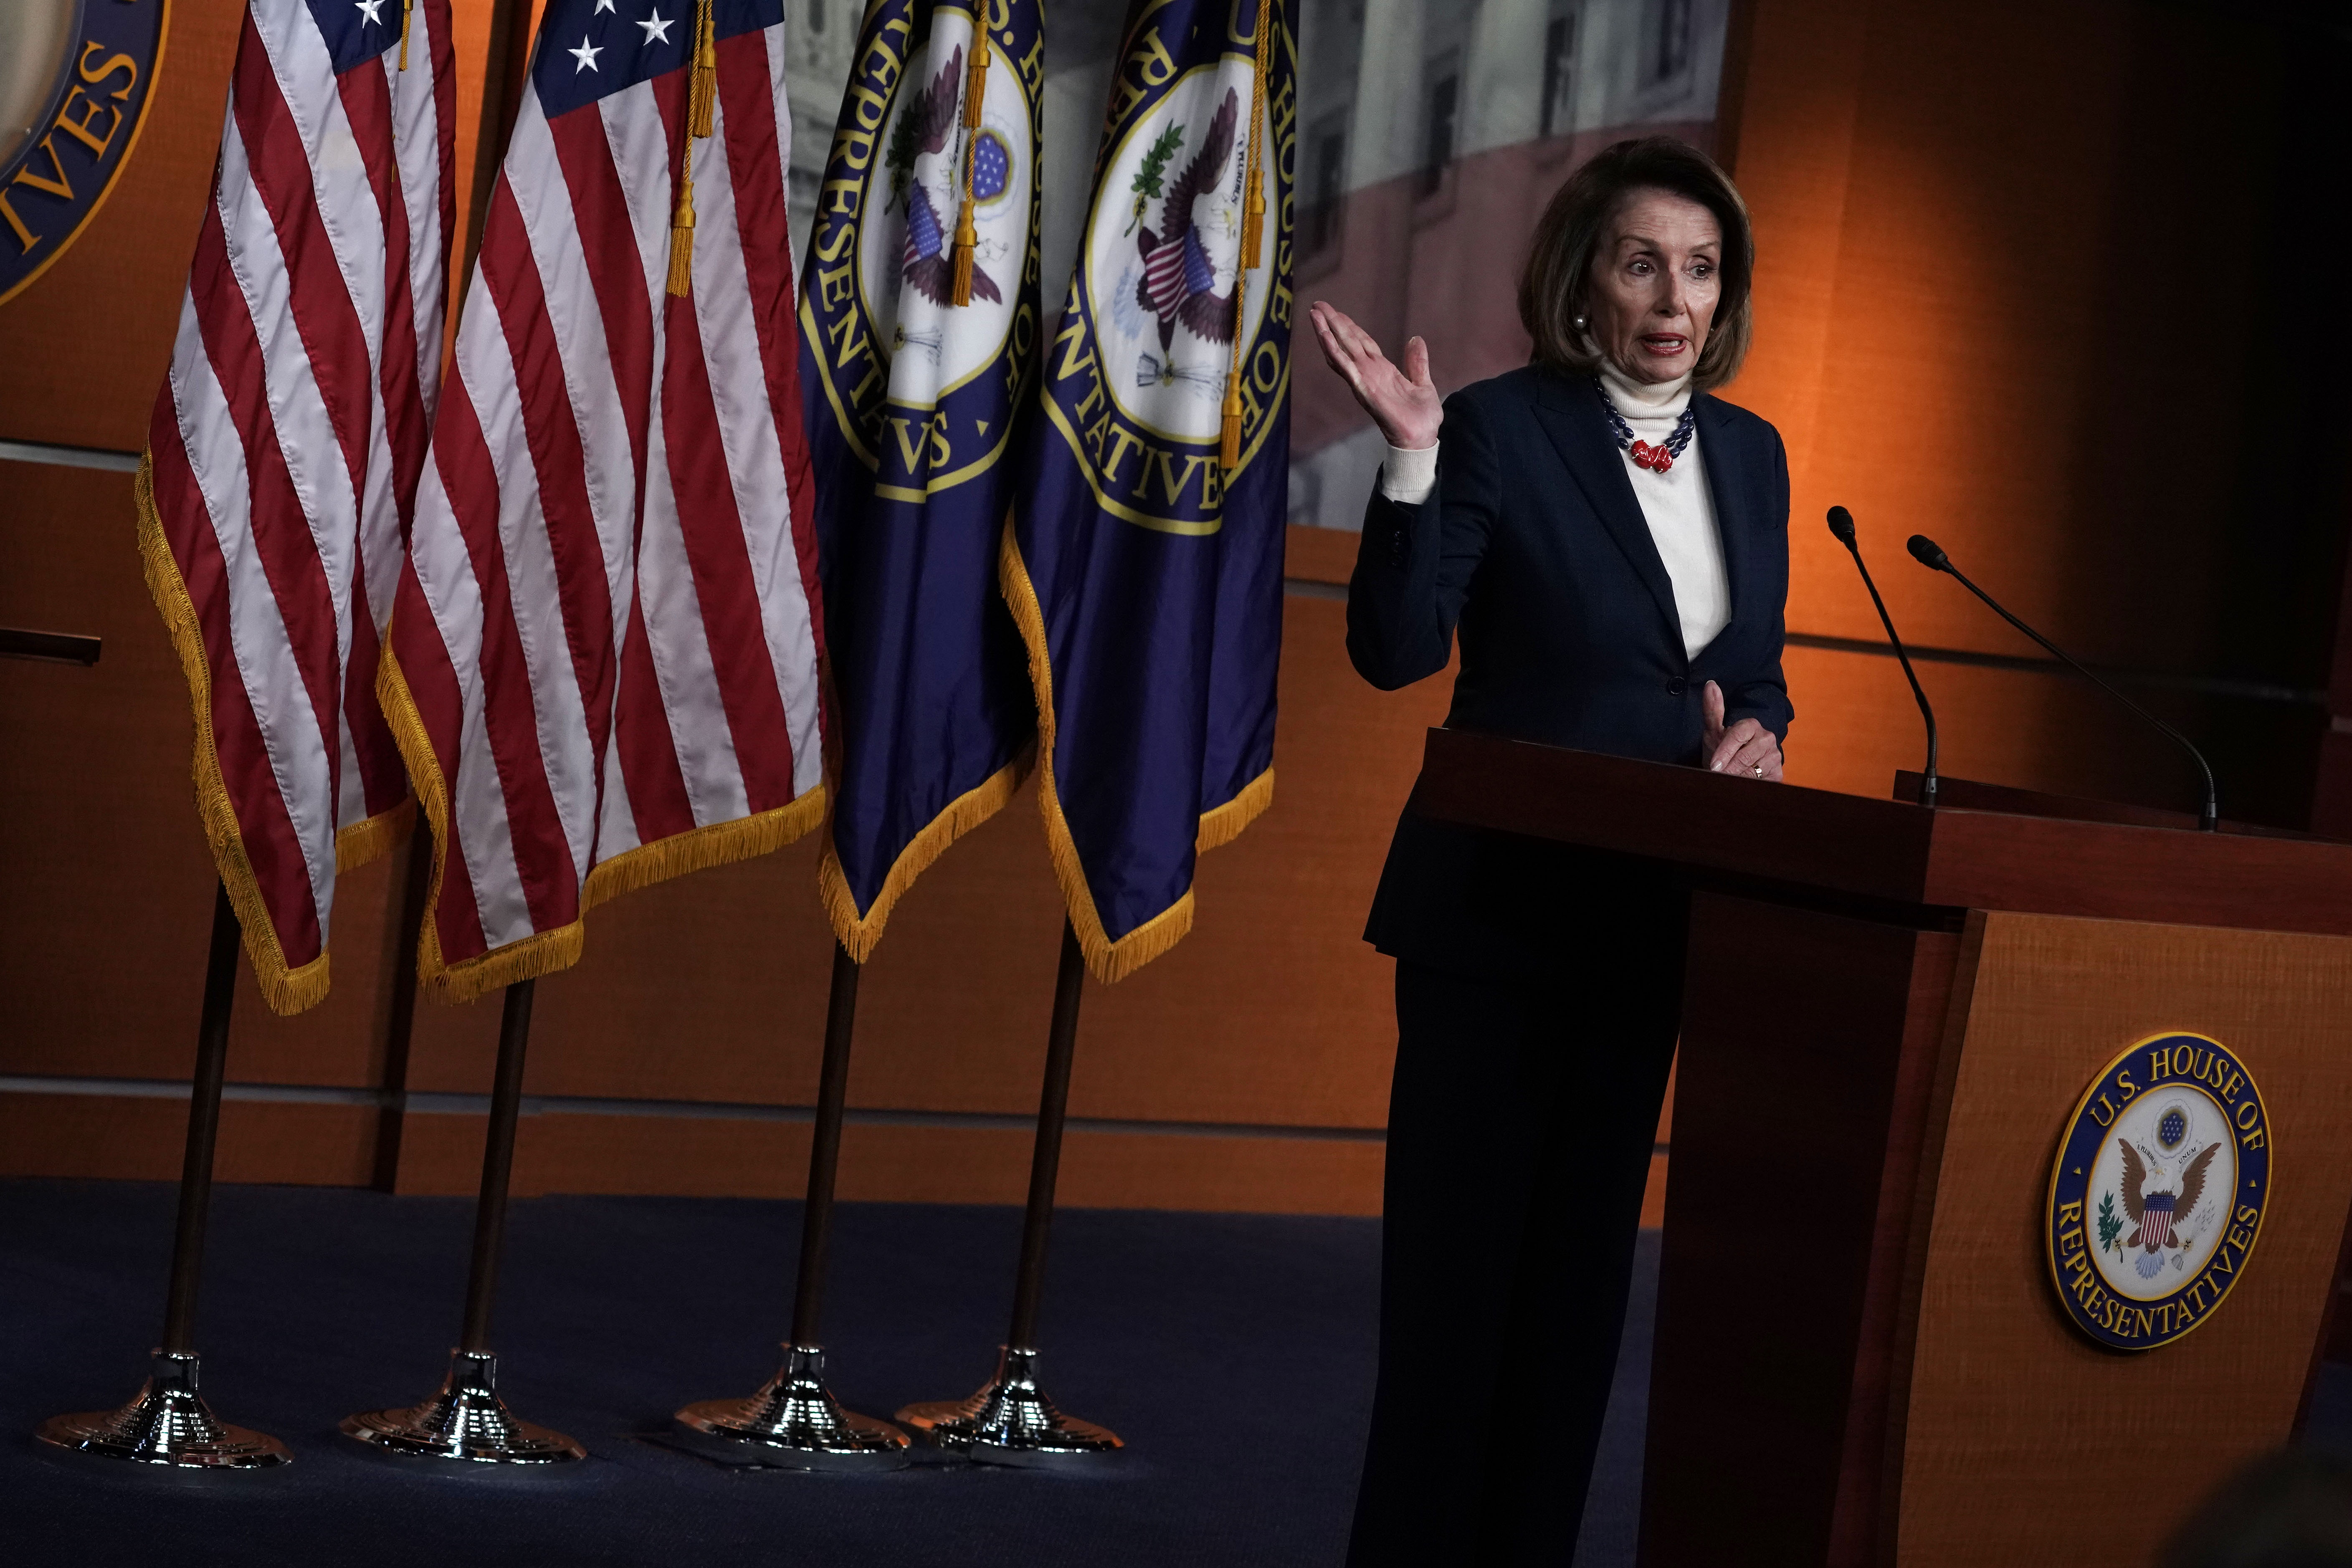 U.S. Speaker of the House Rep. Nancy Pelosi speaks during a weekly news conference January 17, 2019 on Capitol Hill in Washington, DC. (Photo by Alex Wong/Getty Images)